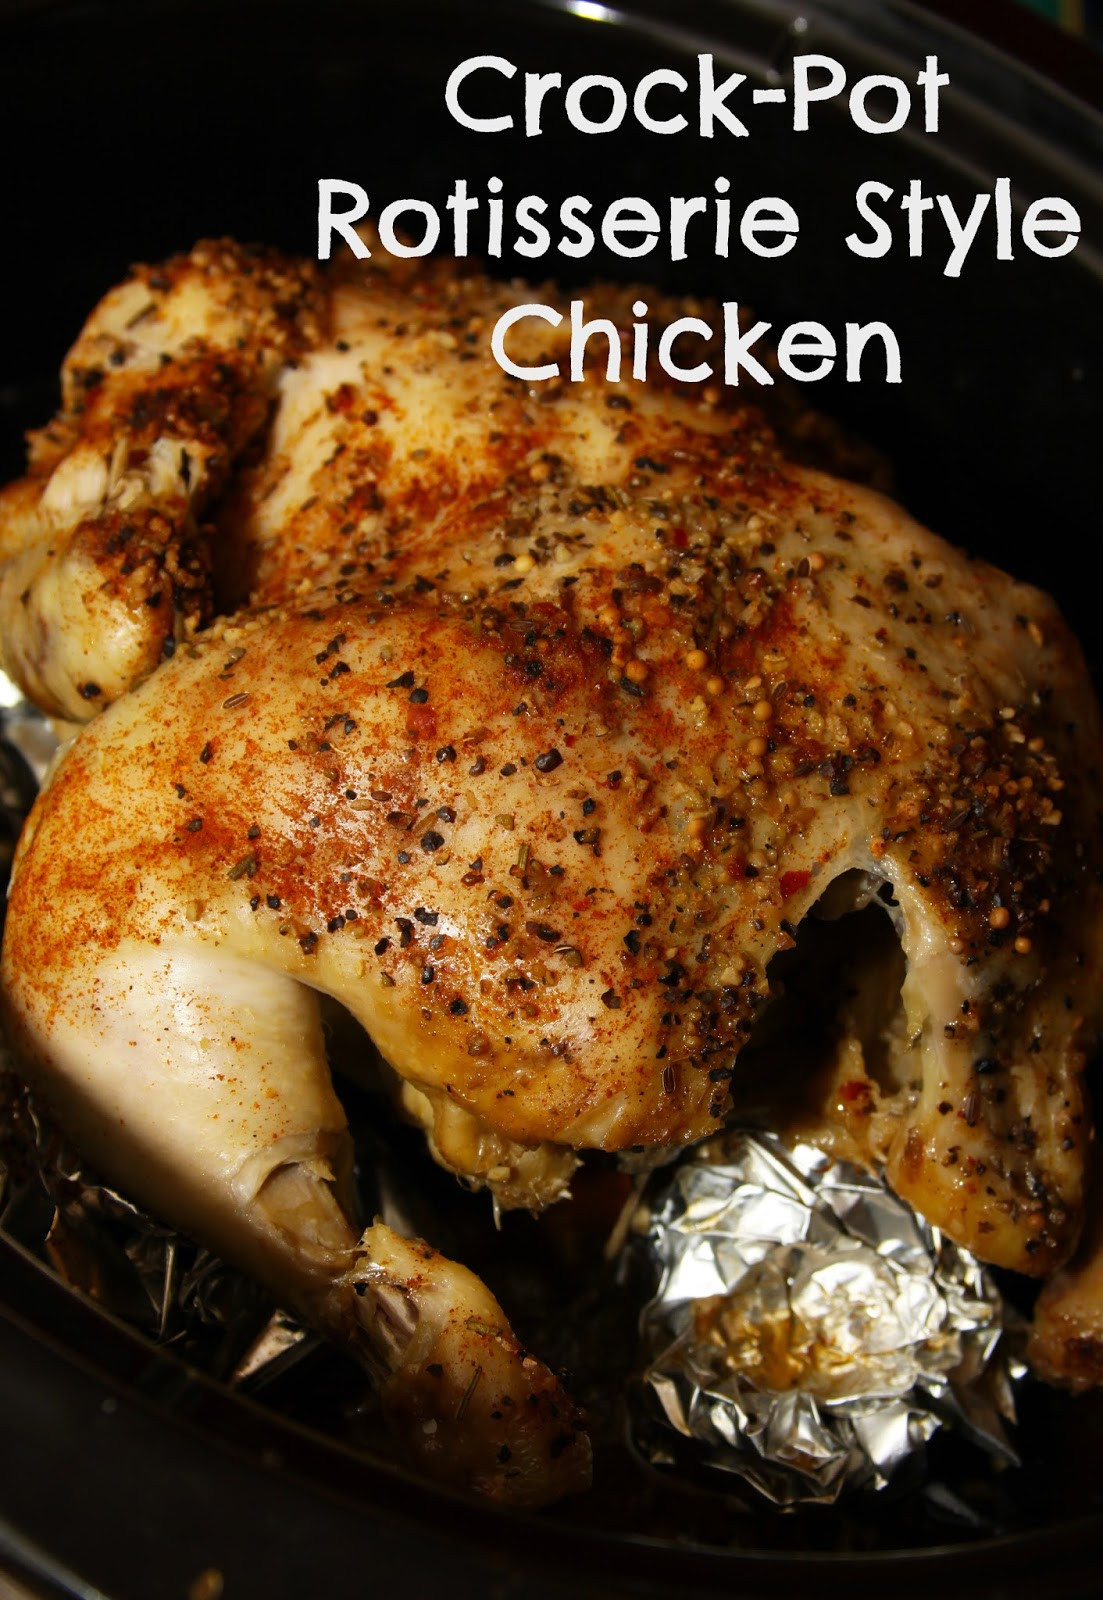 Crockpot Whole Chicken Recipe
 For the Love of Food Crock Pot Rotisserie Style Chicken